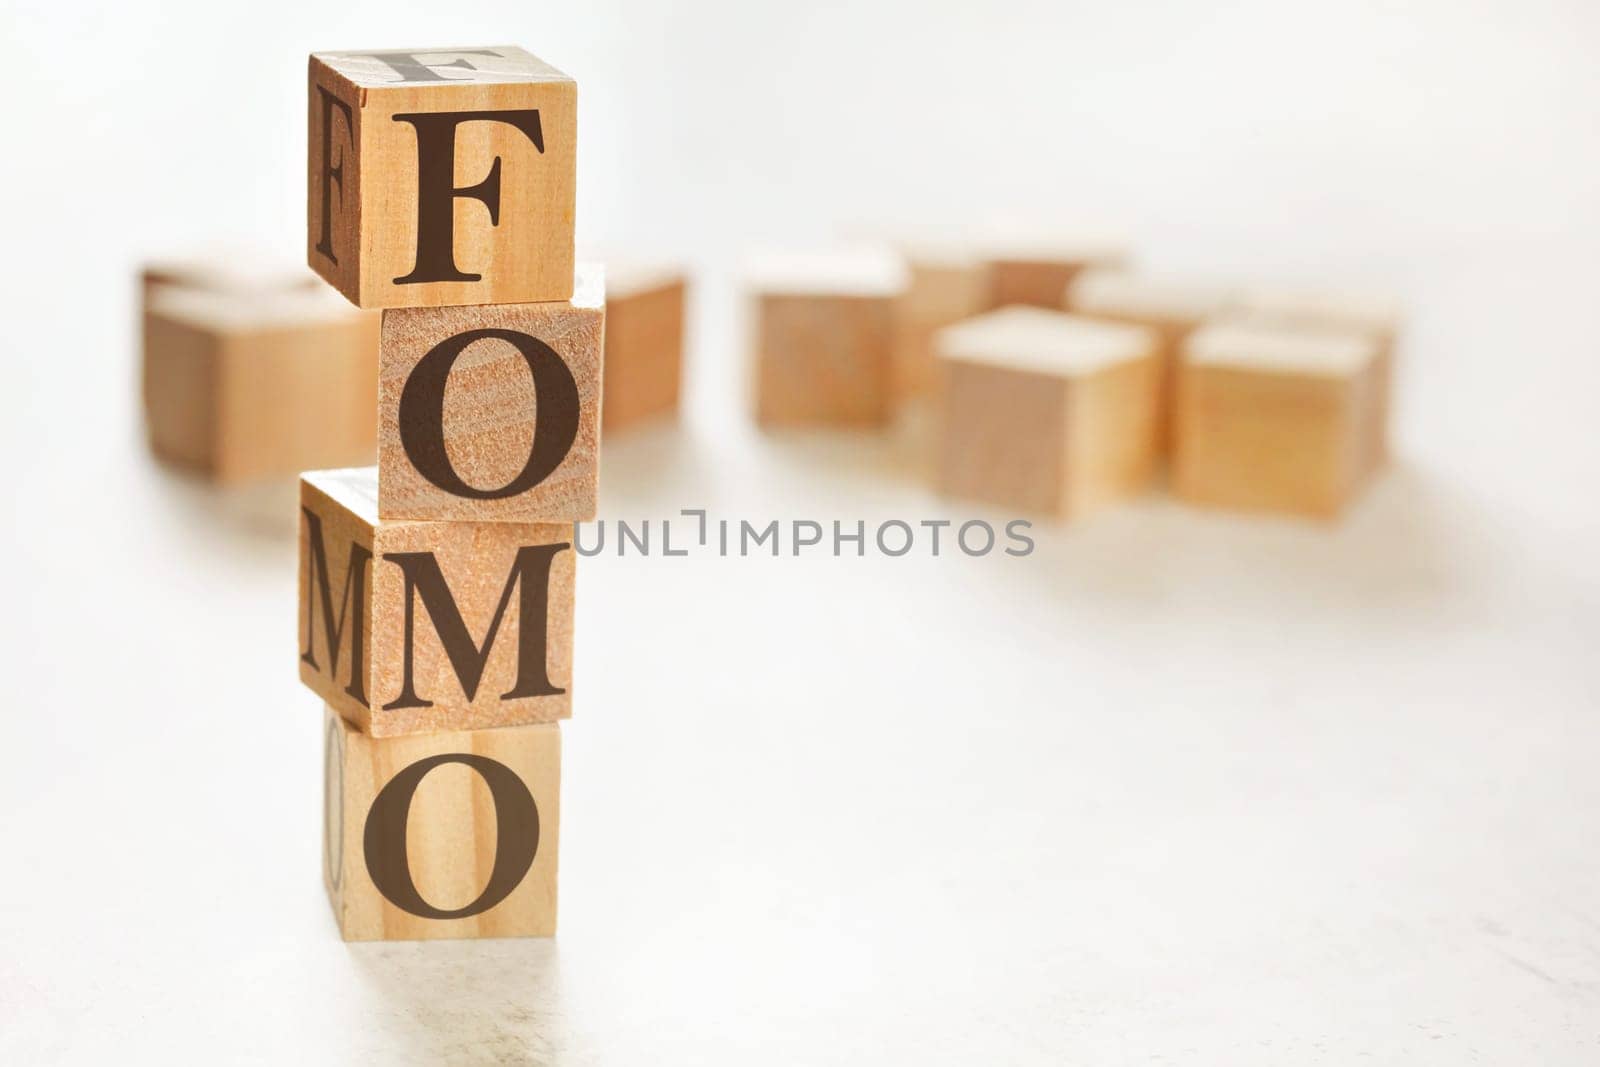 Four wooden cubes arranged in stack with letters FOMO (meaning Fear of Missing Out) on them, space for text / image at down right corner by Ivanko